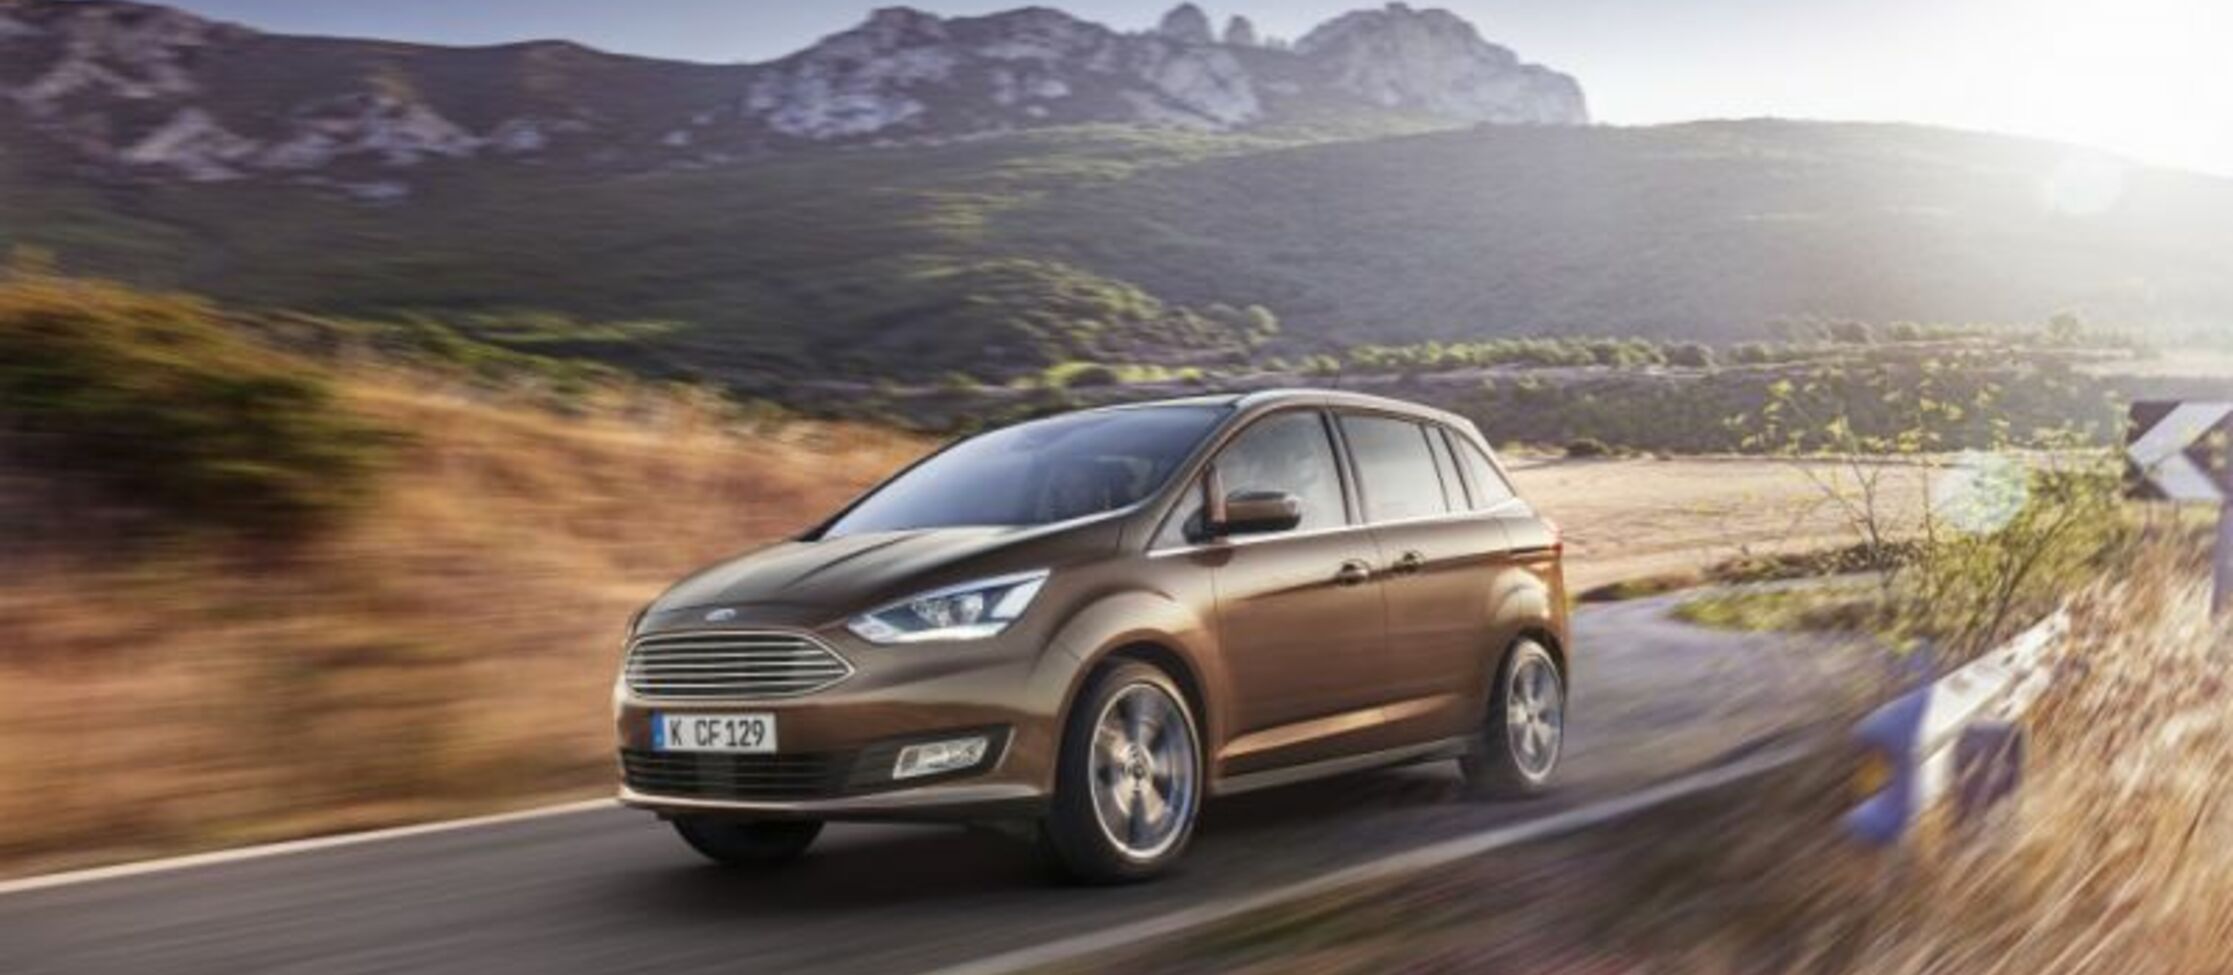 Ford Grand C-MAX (facelift 2015) 1.5 TDCi (120 Hp) 2015, 2016, 2017, 2018, 2019, 2020, 2021